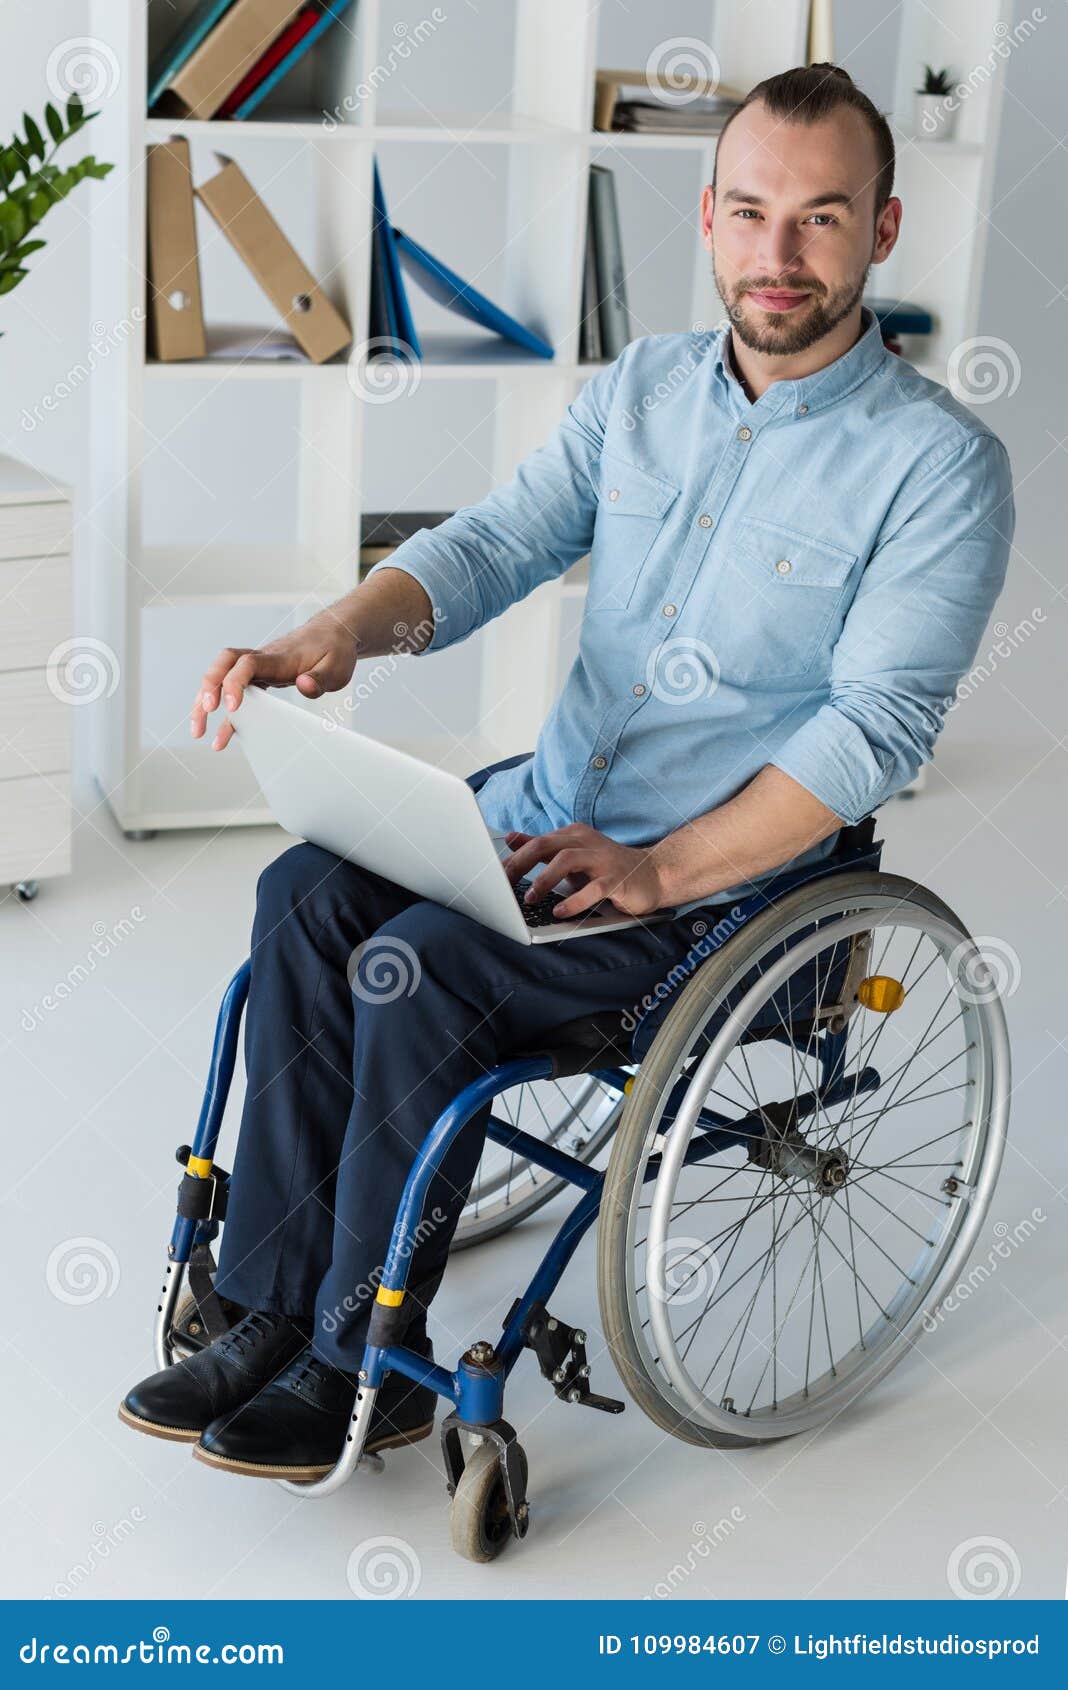 Businessman in Wheelchair Using Laptop Stock Image - Image of ...